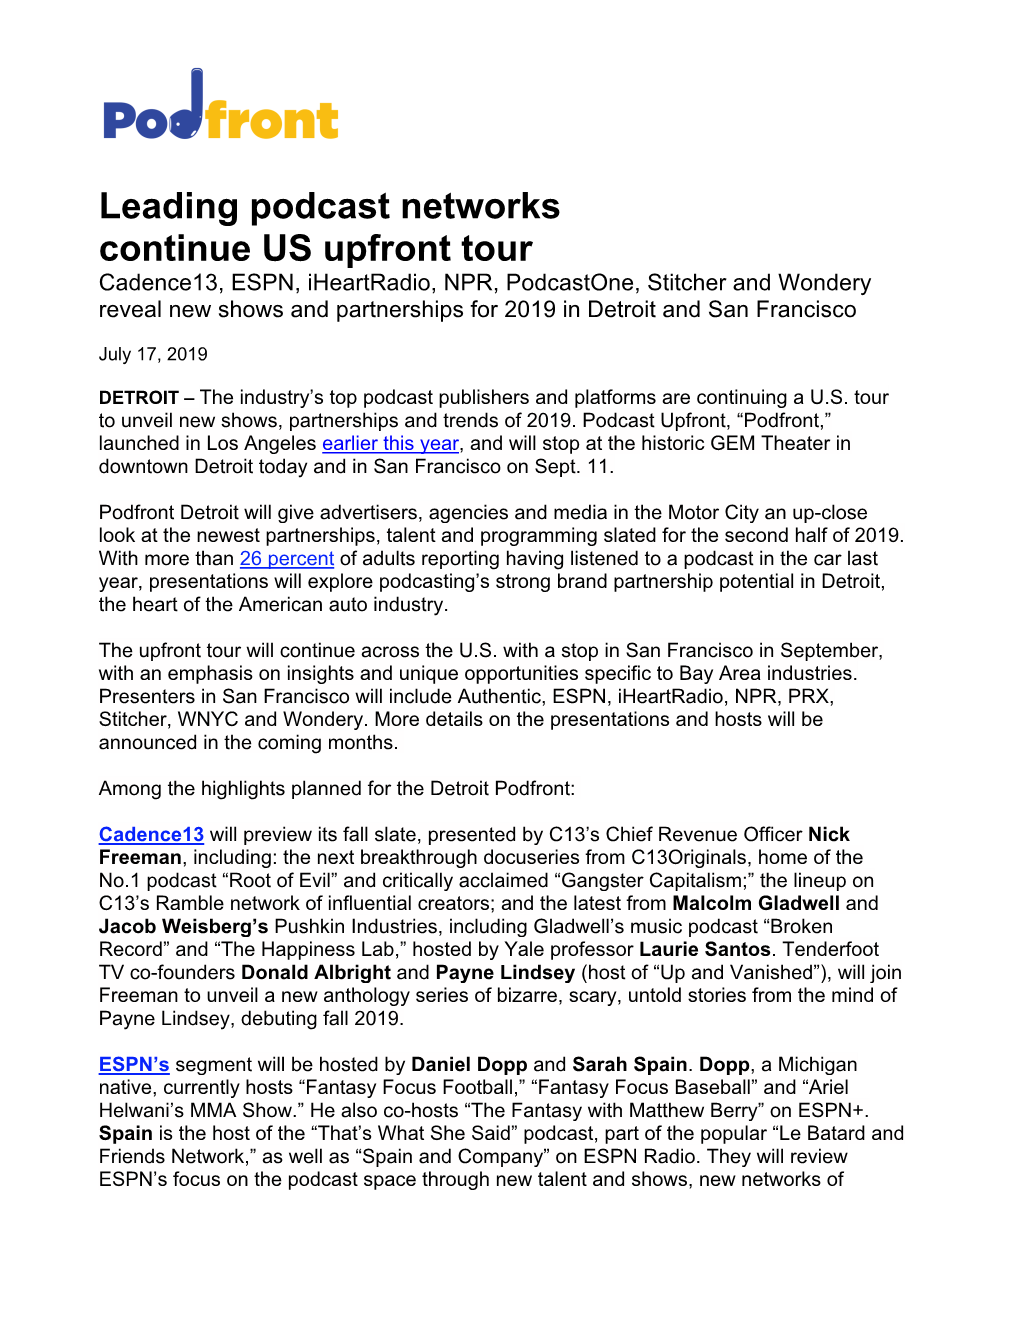 Leading Podcast Networks Continue US Upfront Tour